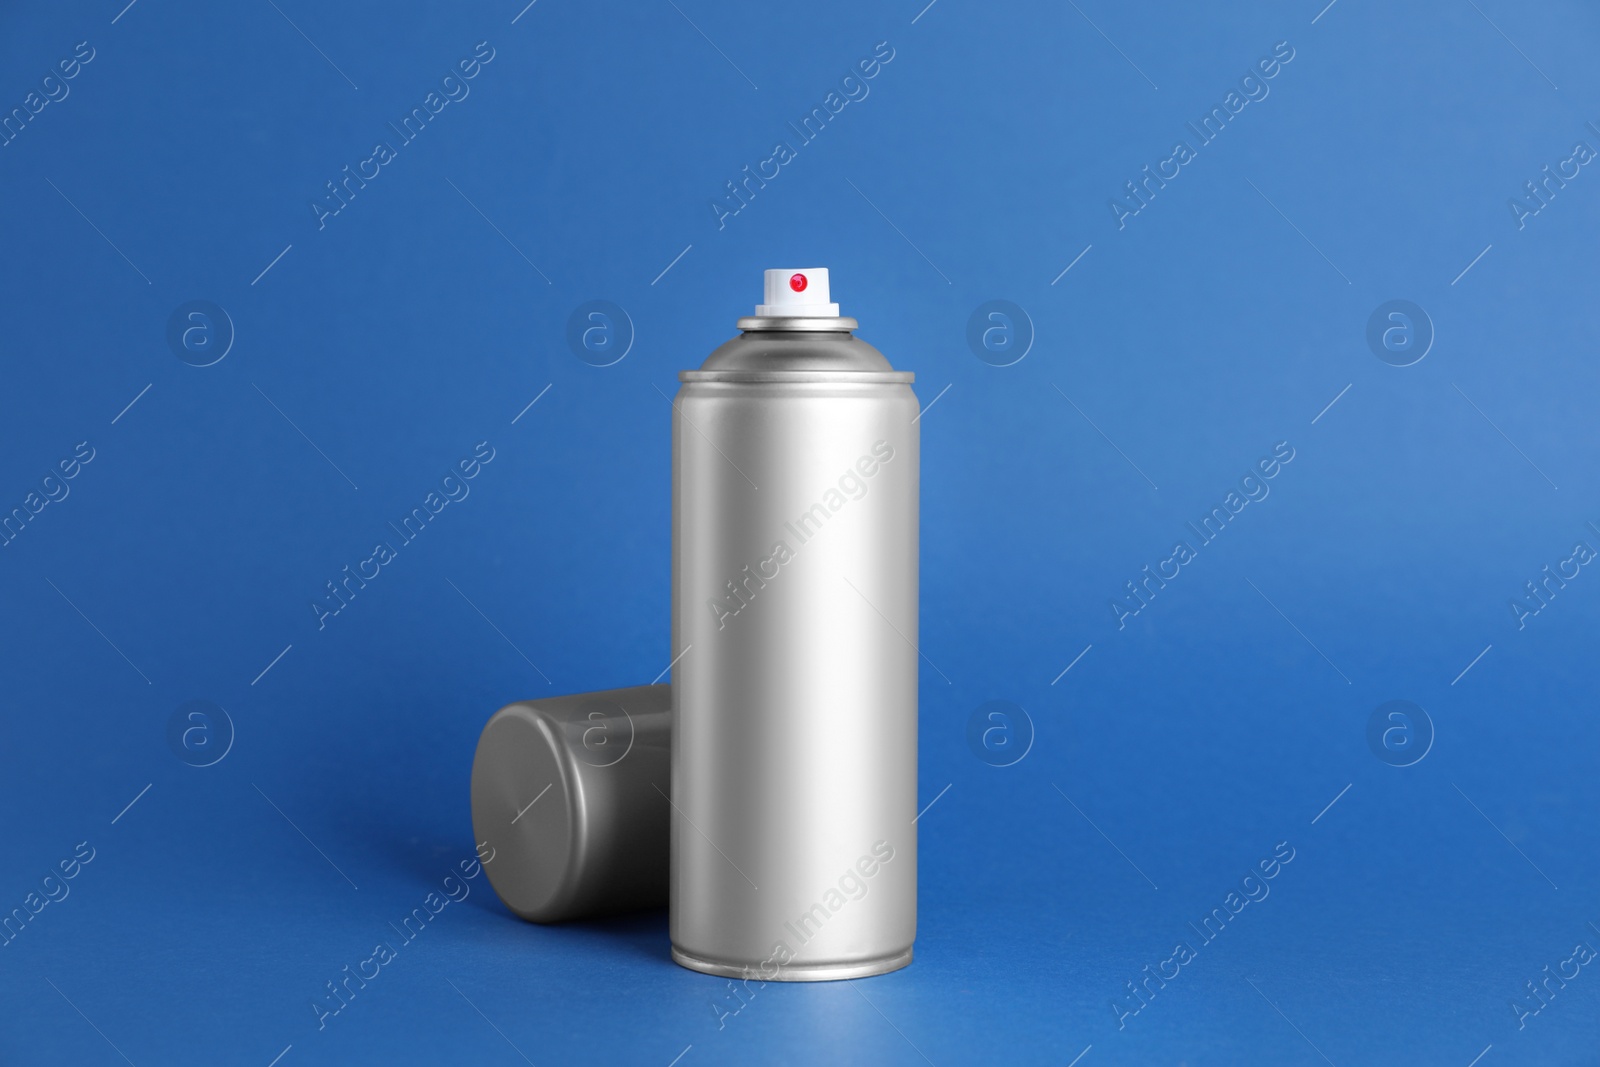 Photo of Can of spray paint on blue background